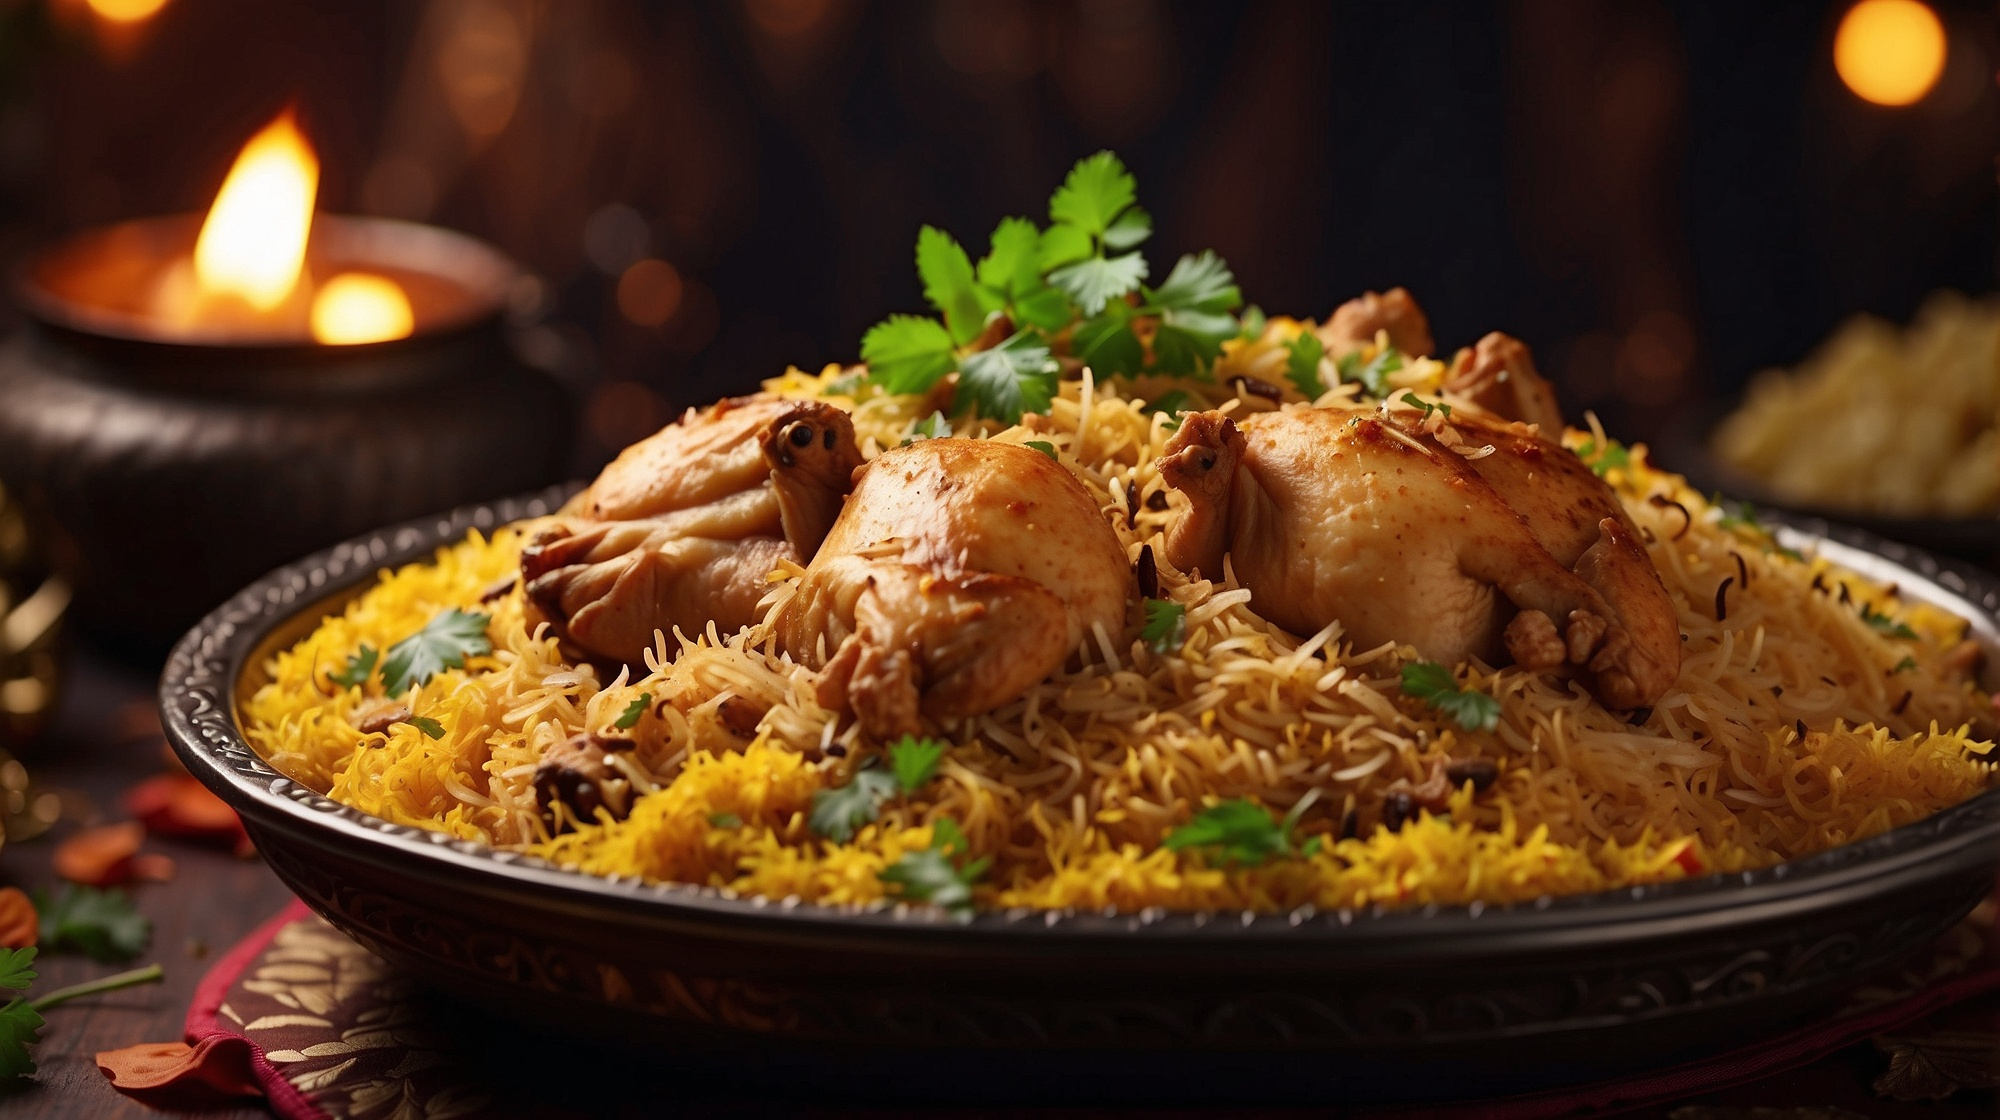 Biryani dish - a popular Indian rice dish with flavorful spices and ingredients.